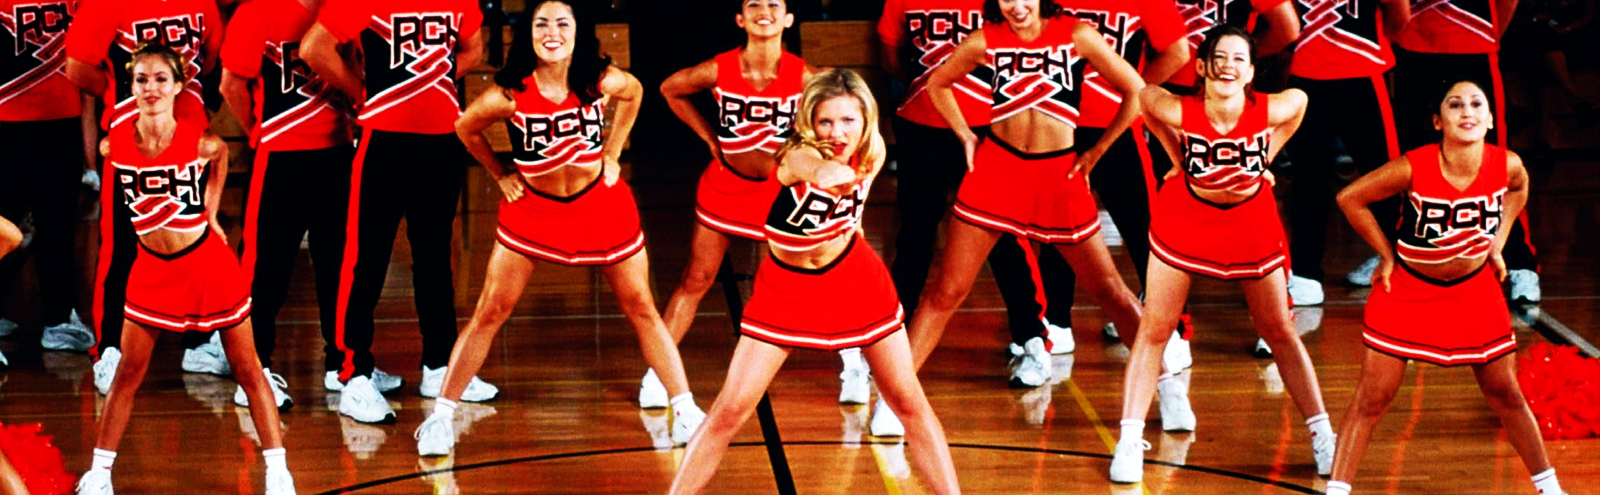 Reflecting On How ‘Bring It On’ Defined Itself With That Wild Opening ...